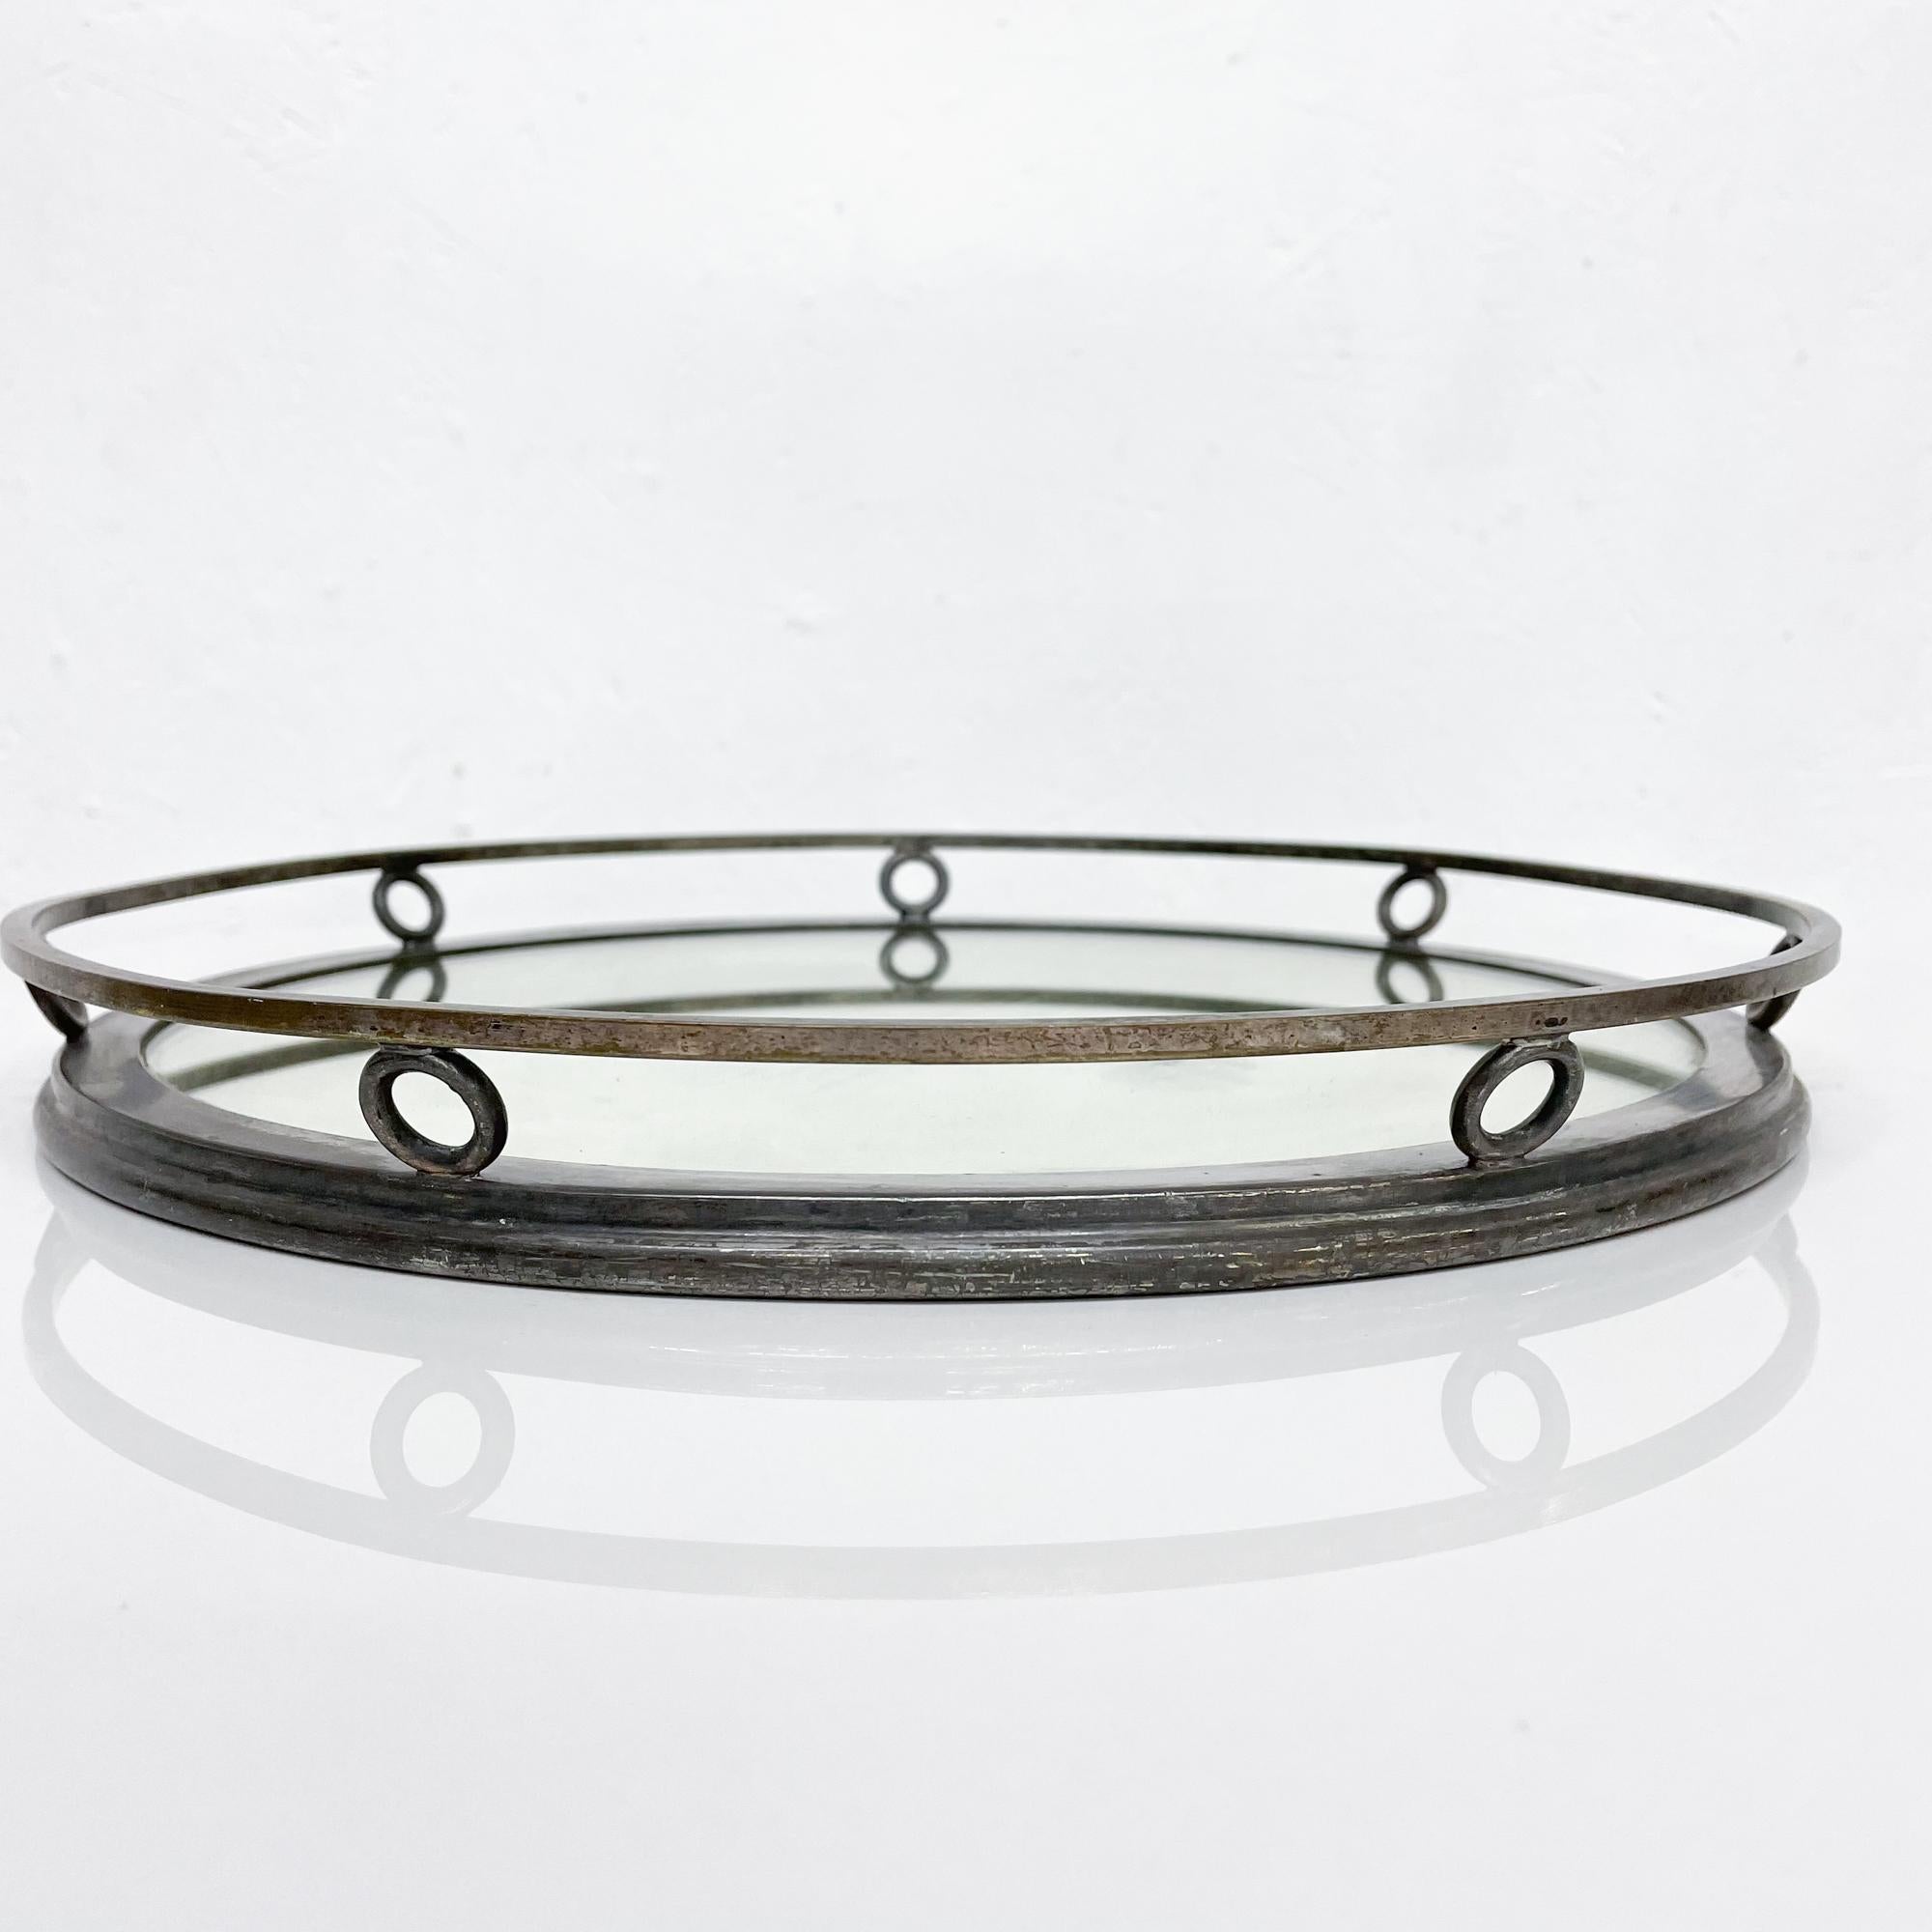 Mid-Century Modern Antique Art Deco Mirrored Circular Tray with Silver Plate Trim, 1950s, USA